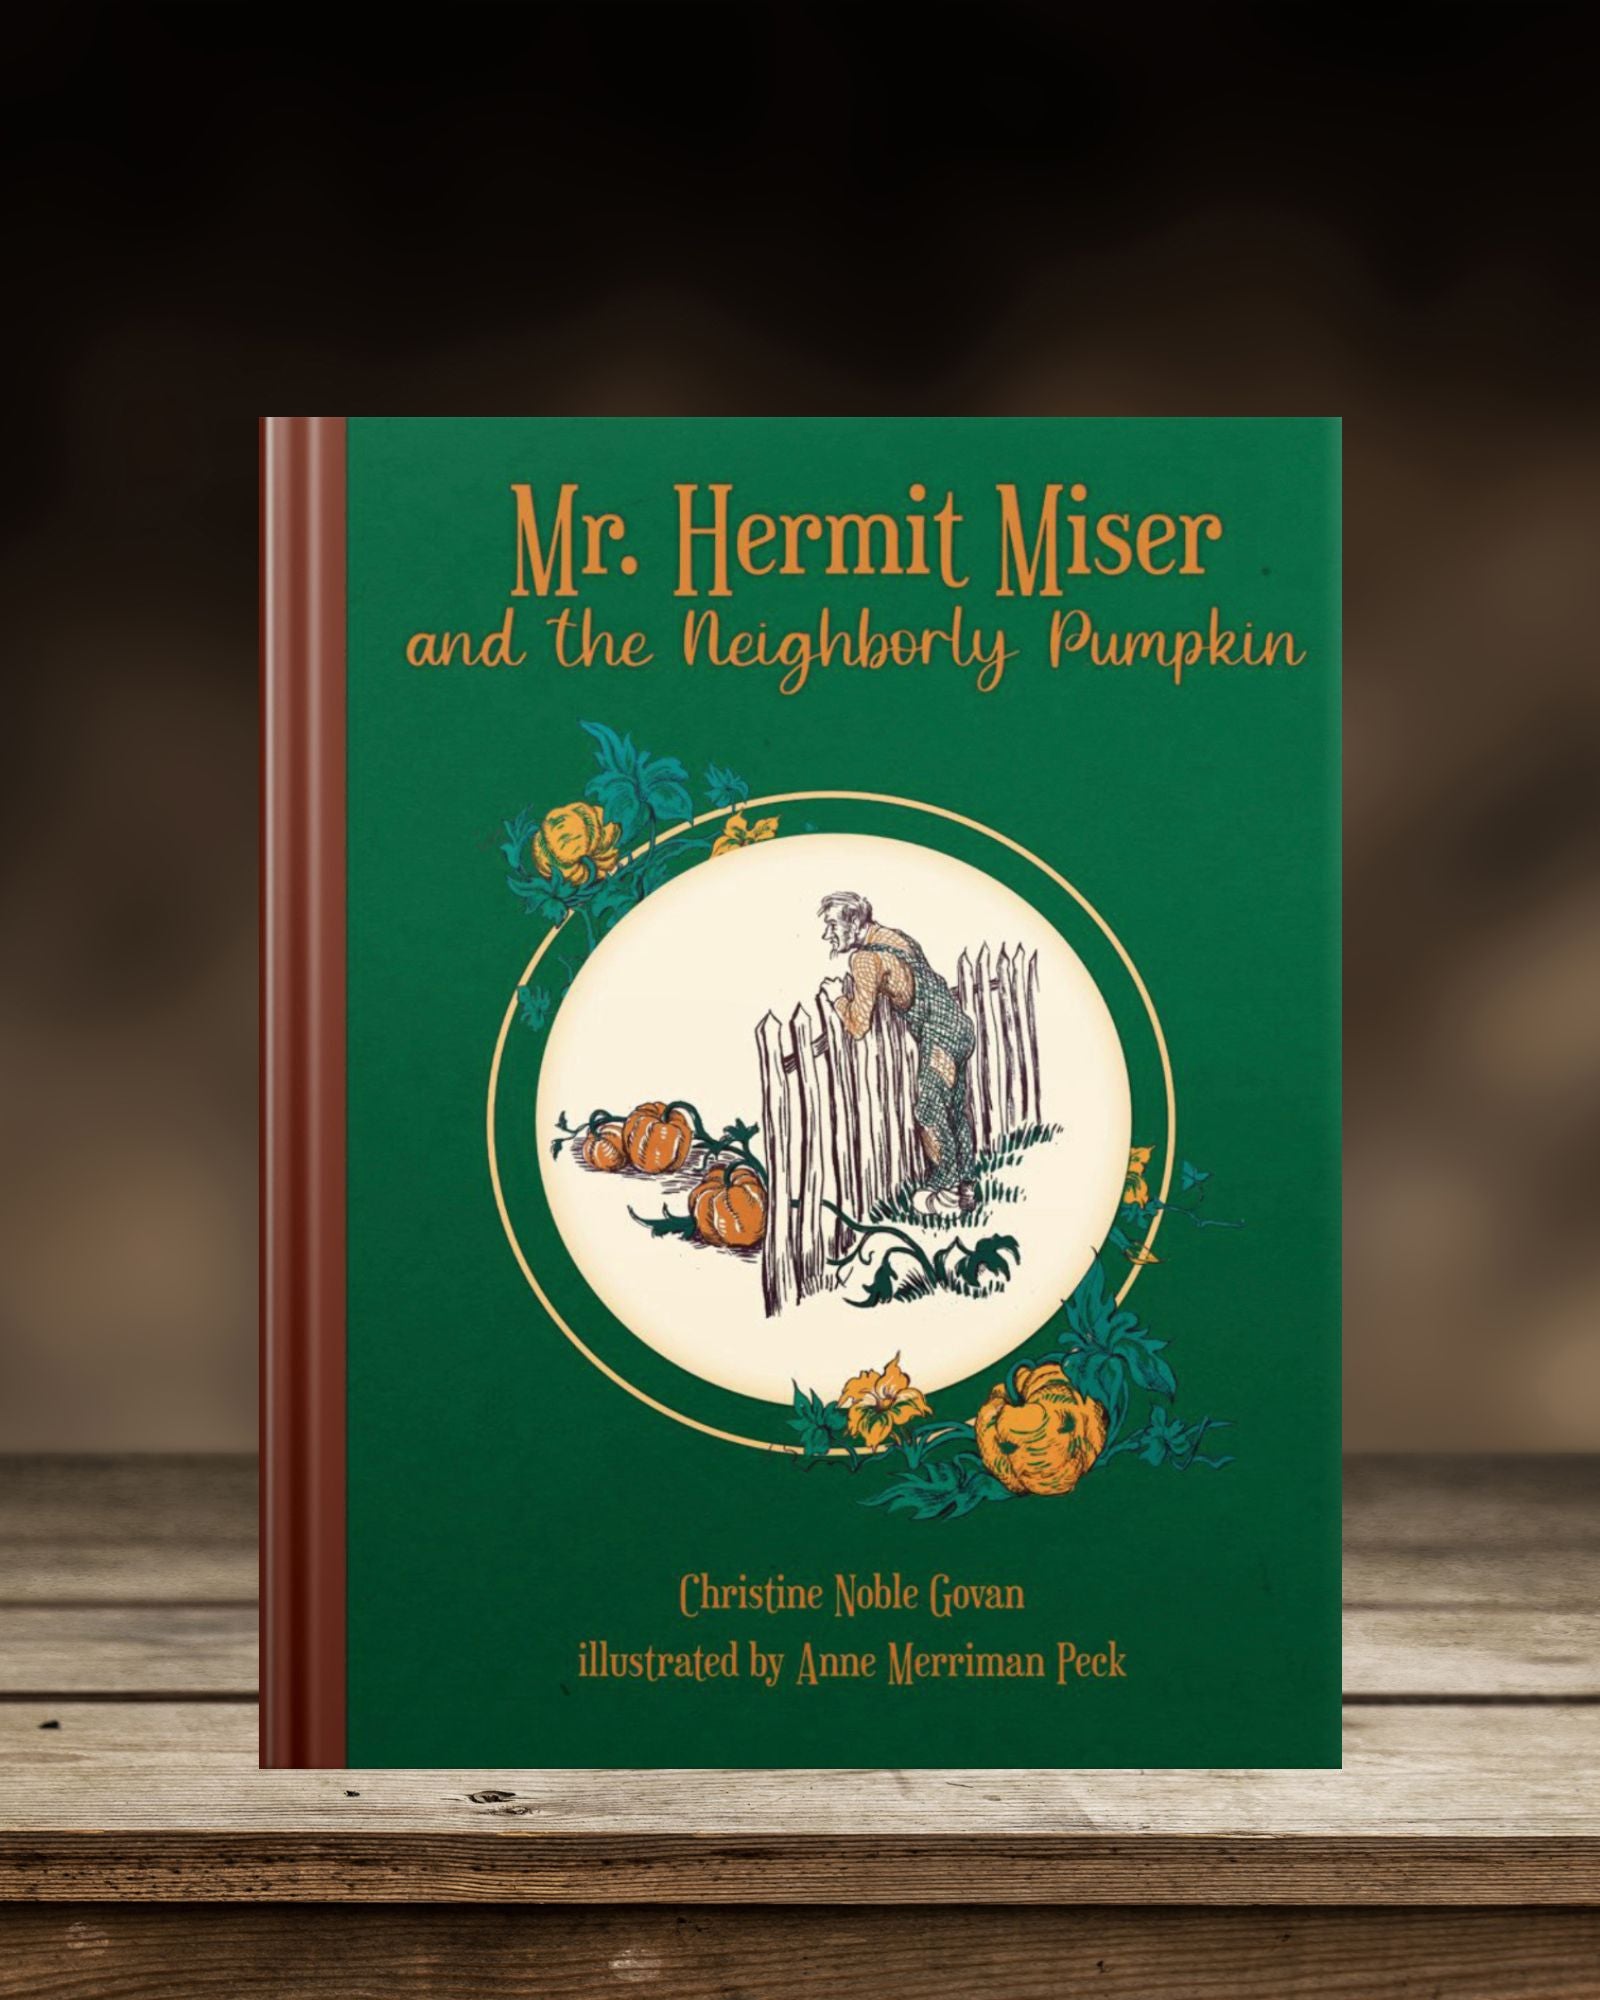 Hardcover of "Mr. Hermit Miser and the Neighborly Pumpkin," a wholesome autumn classic by Noble Govan, published by Smidgen Press